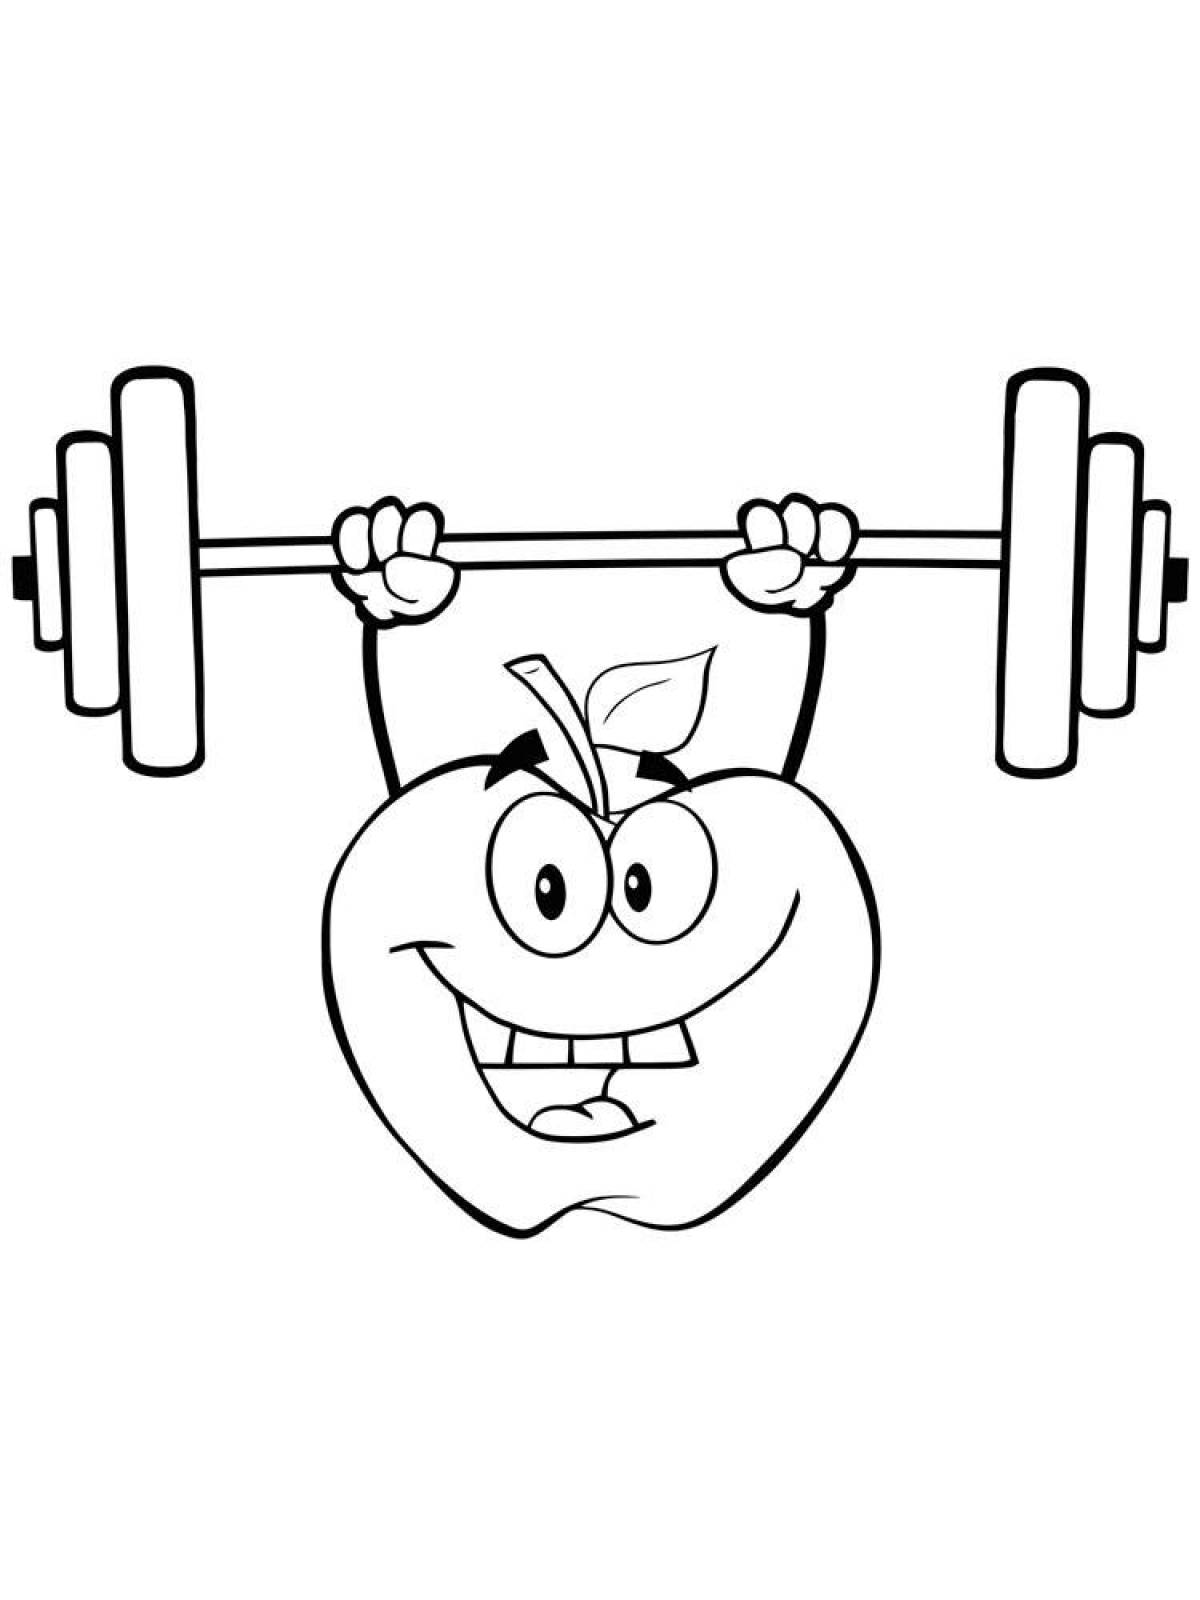 Fit coloring page healthy